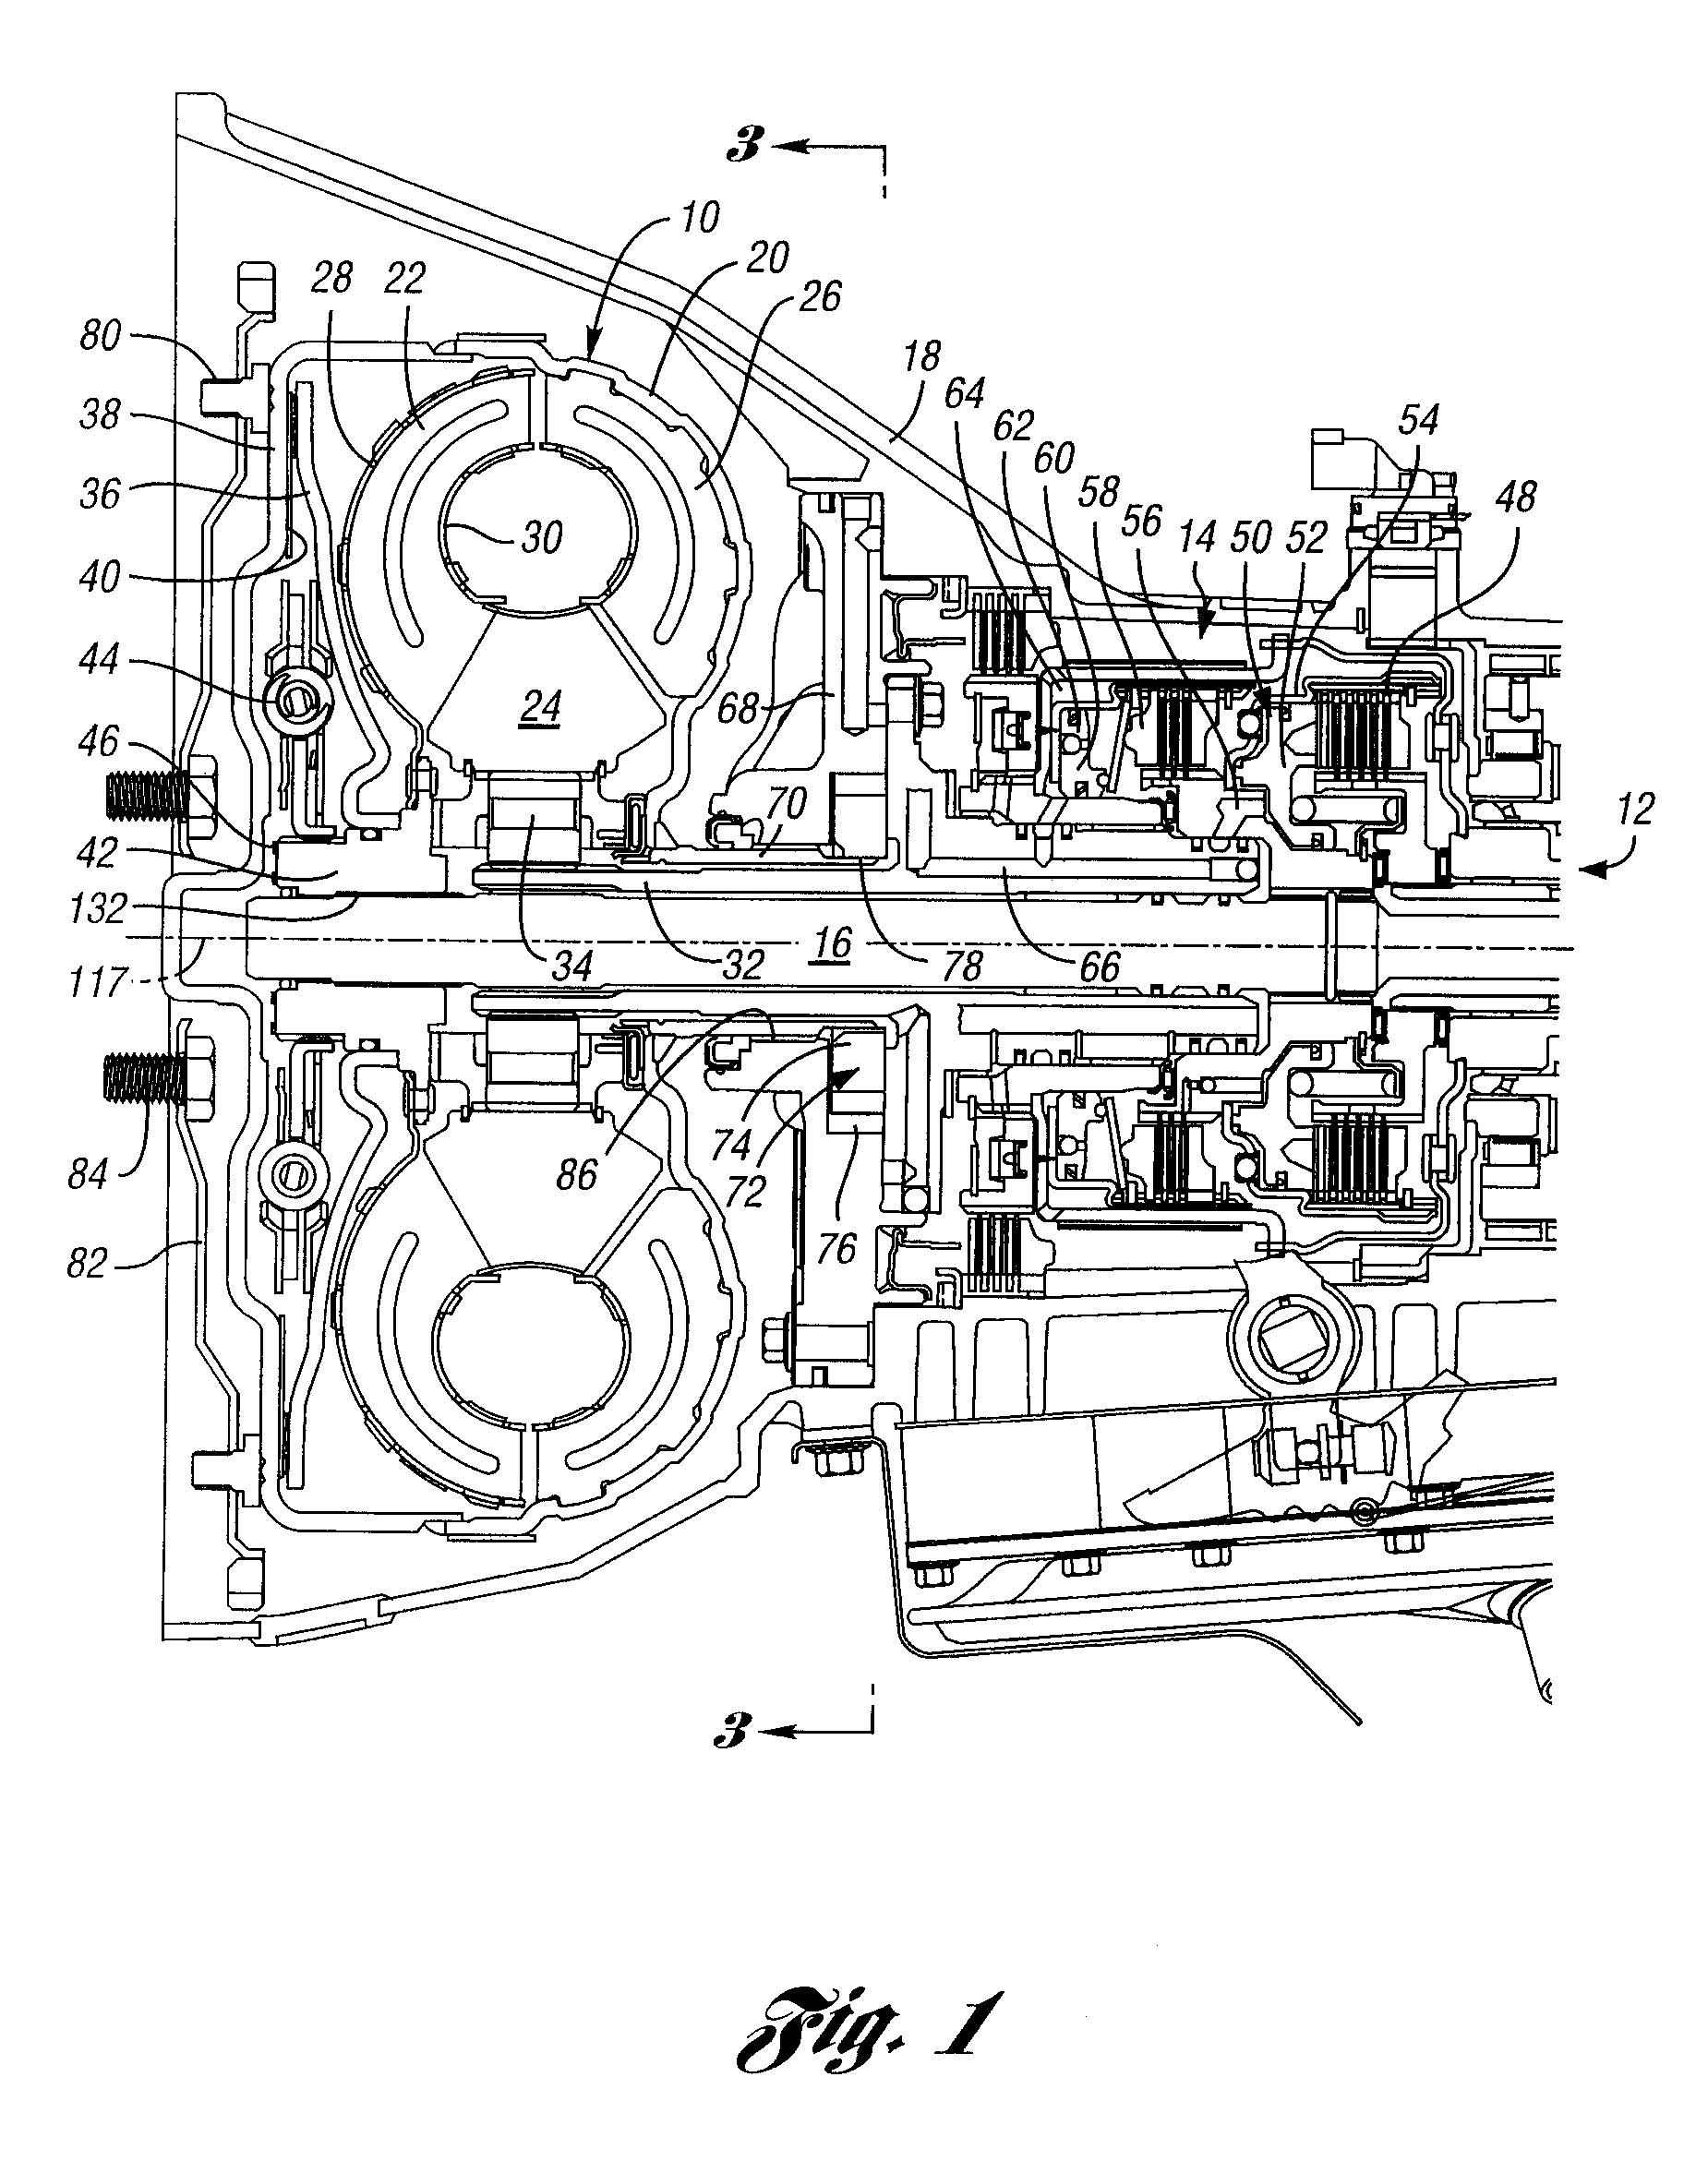 Hydrokinetic torque converter for an automatic vehicle transmission